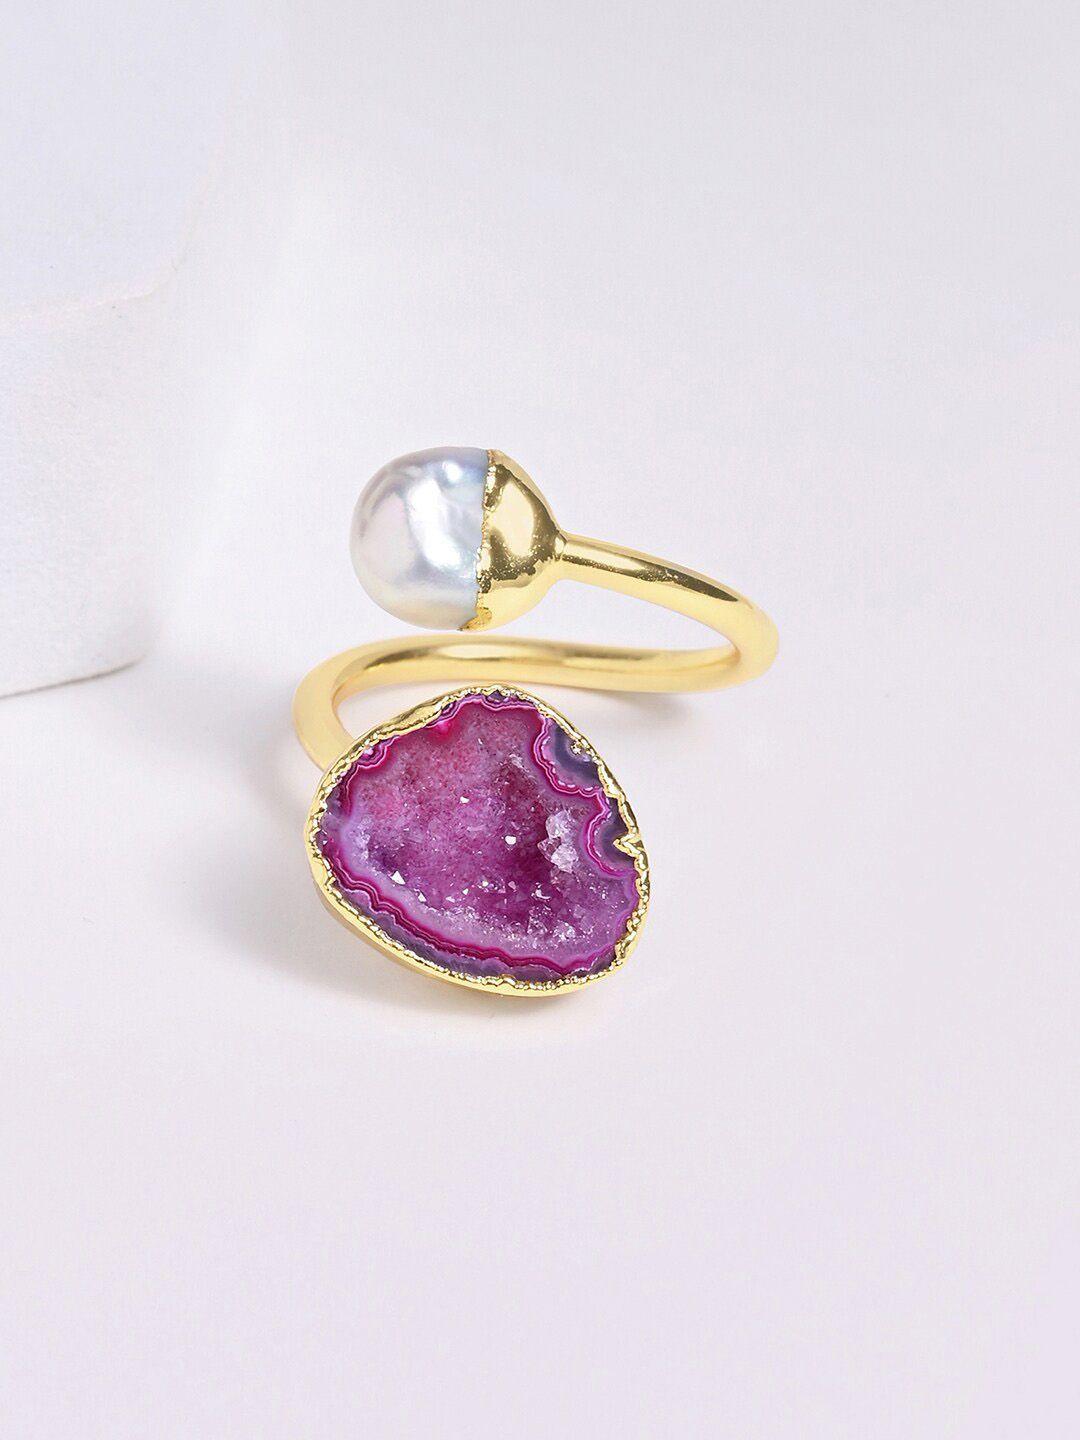 mikoto by fablestreet 18k gold-plated sterling silver baroque pearl & shaded druzy adjustable finger ring